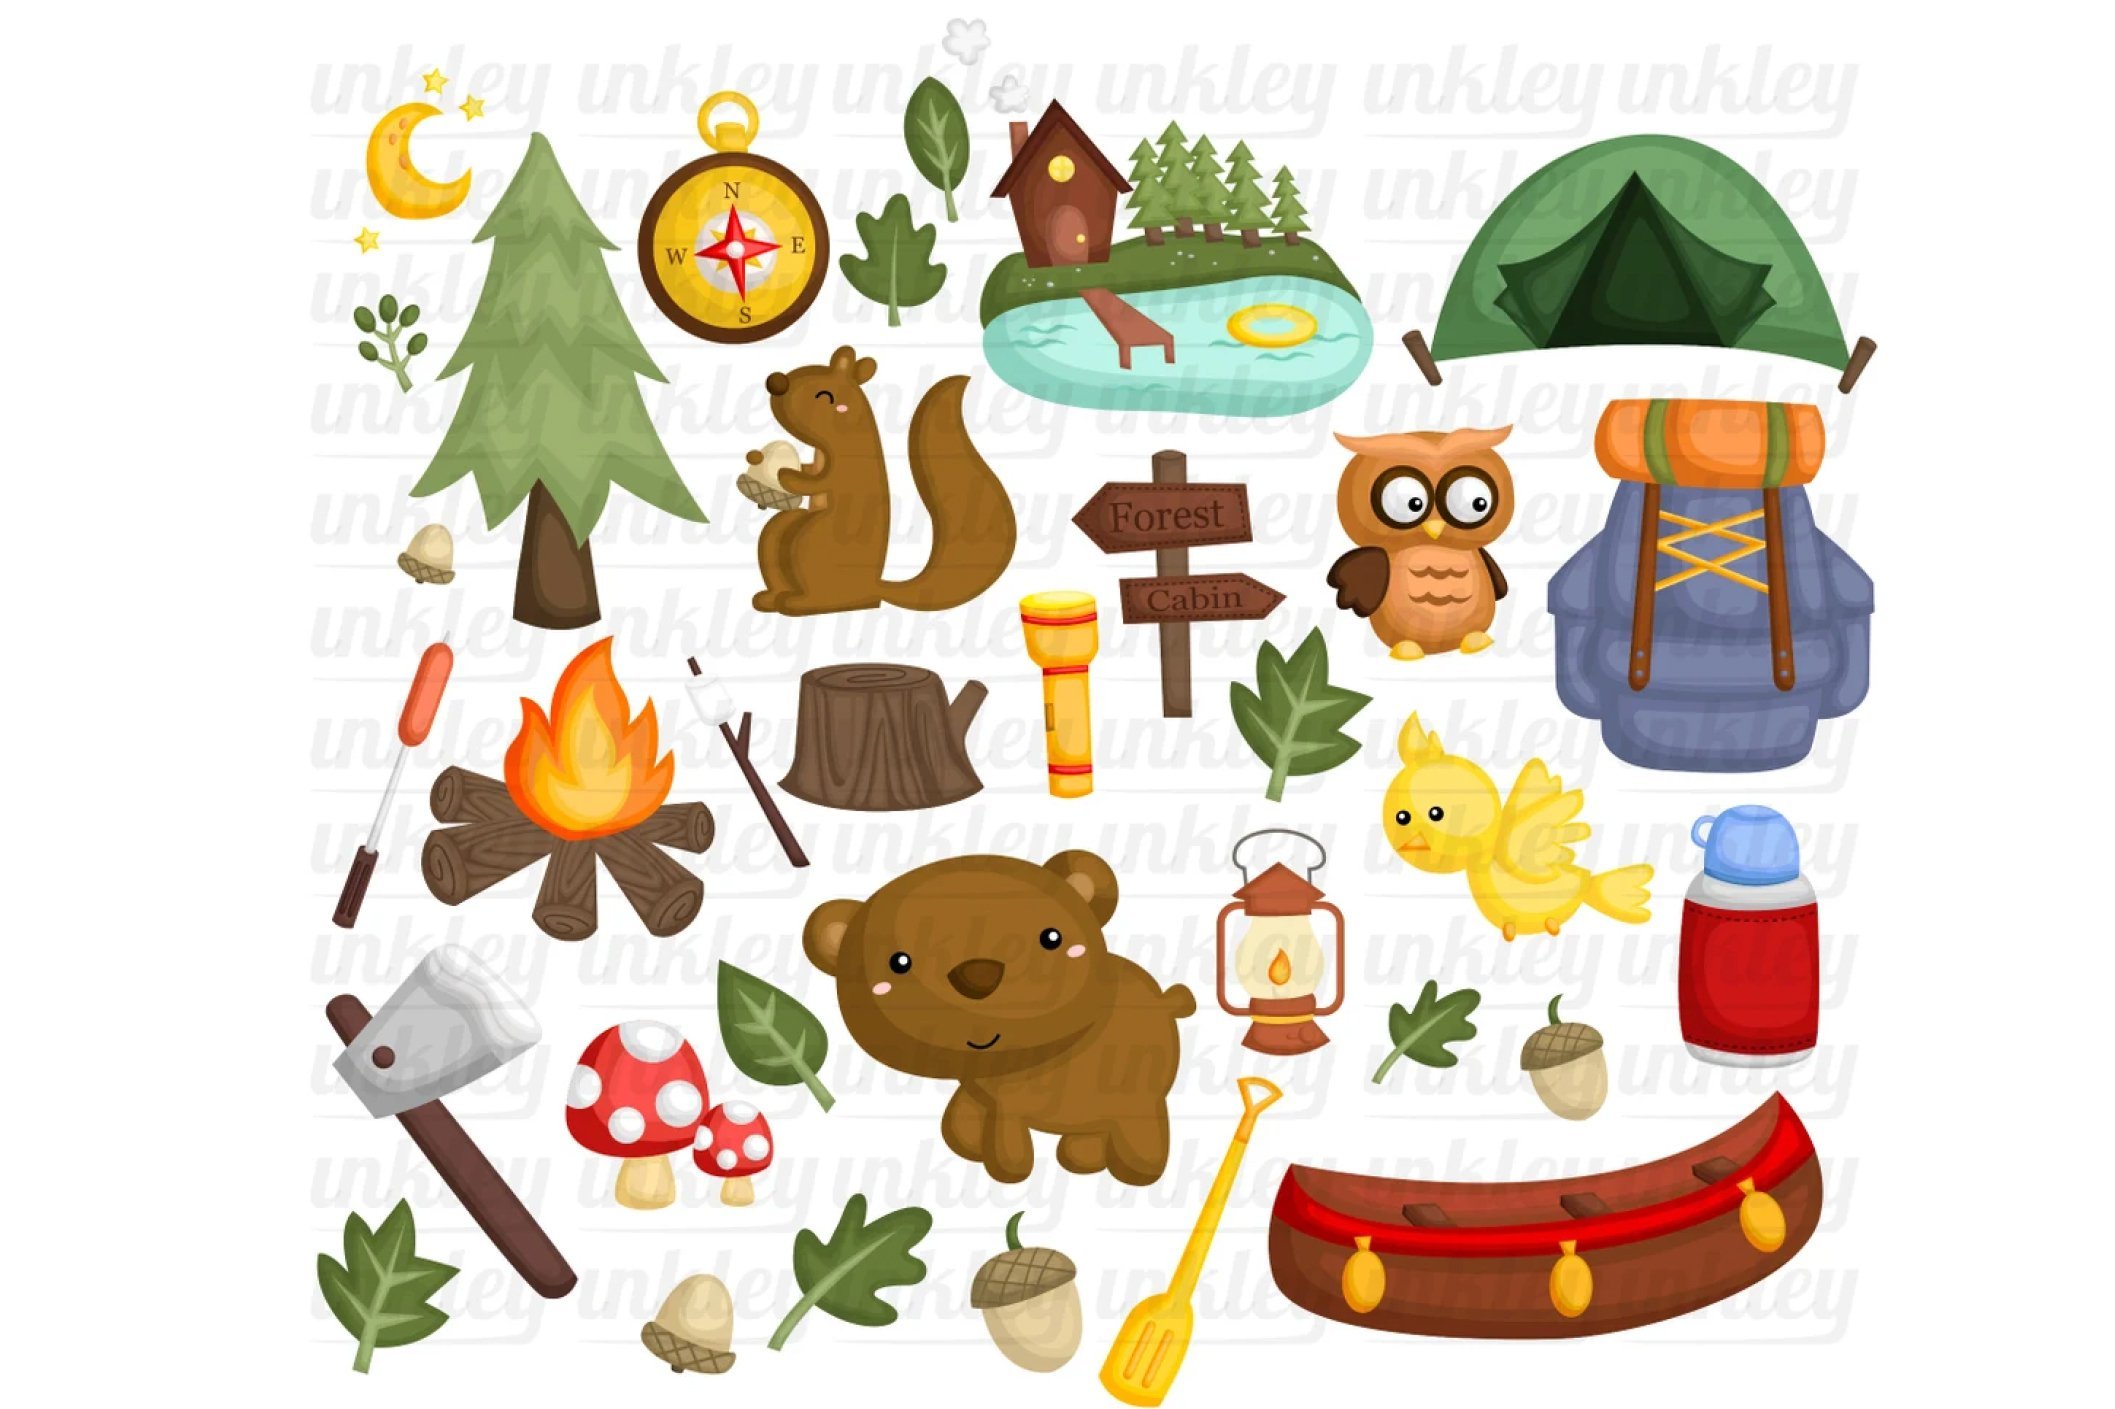 High quality illustrations for camping composition.